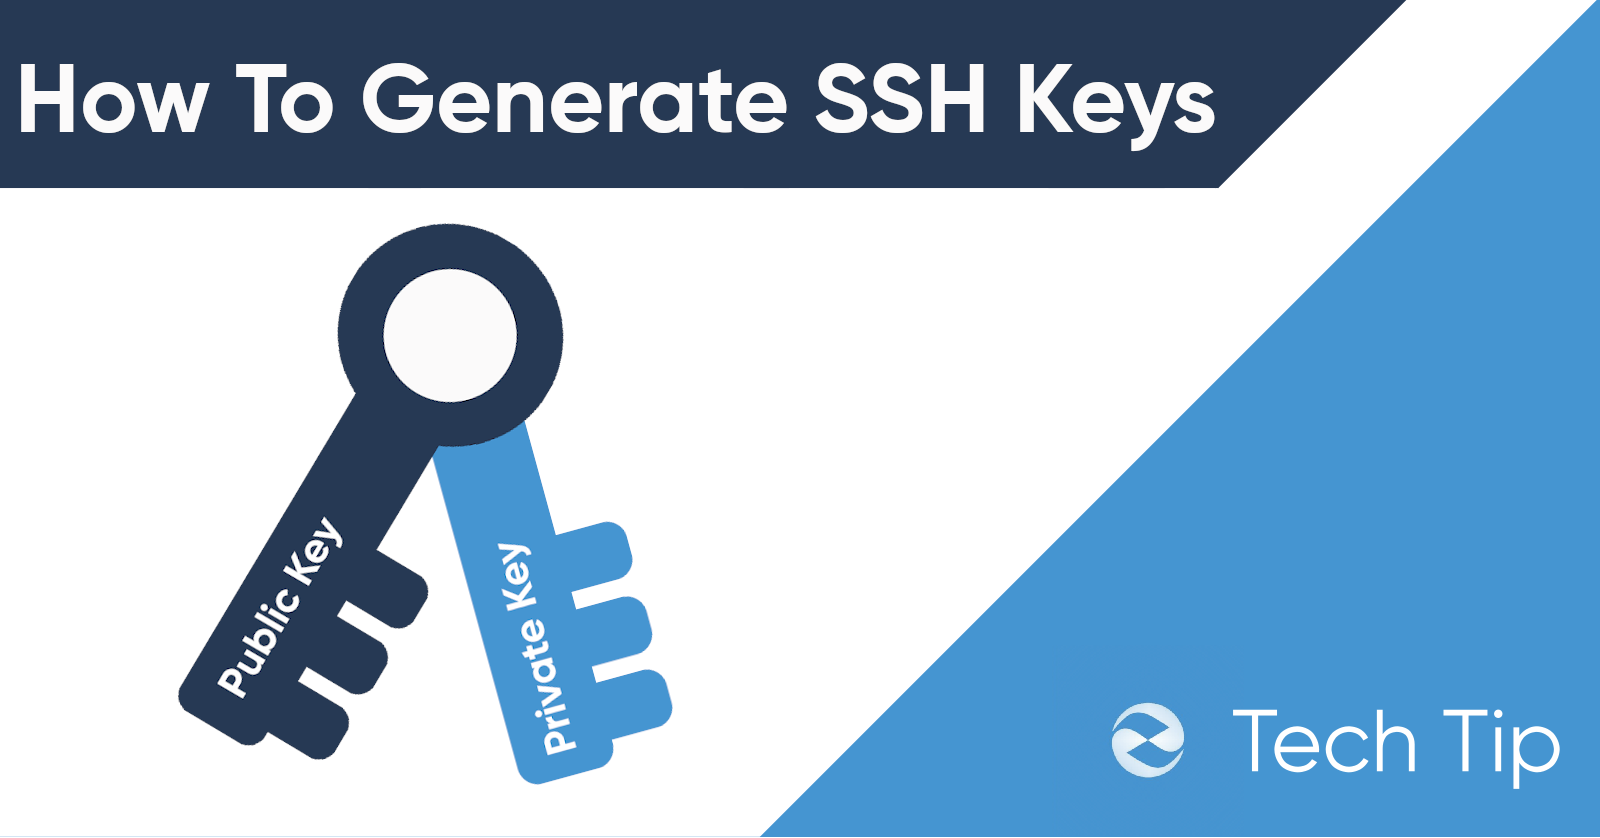 Installing SSH on Linux and Generating Public and Private Keys